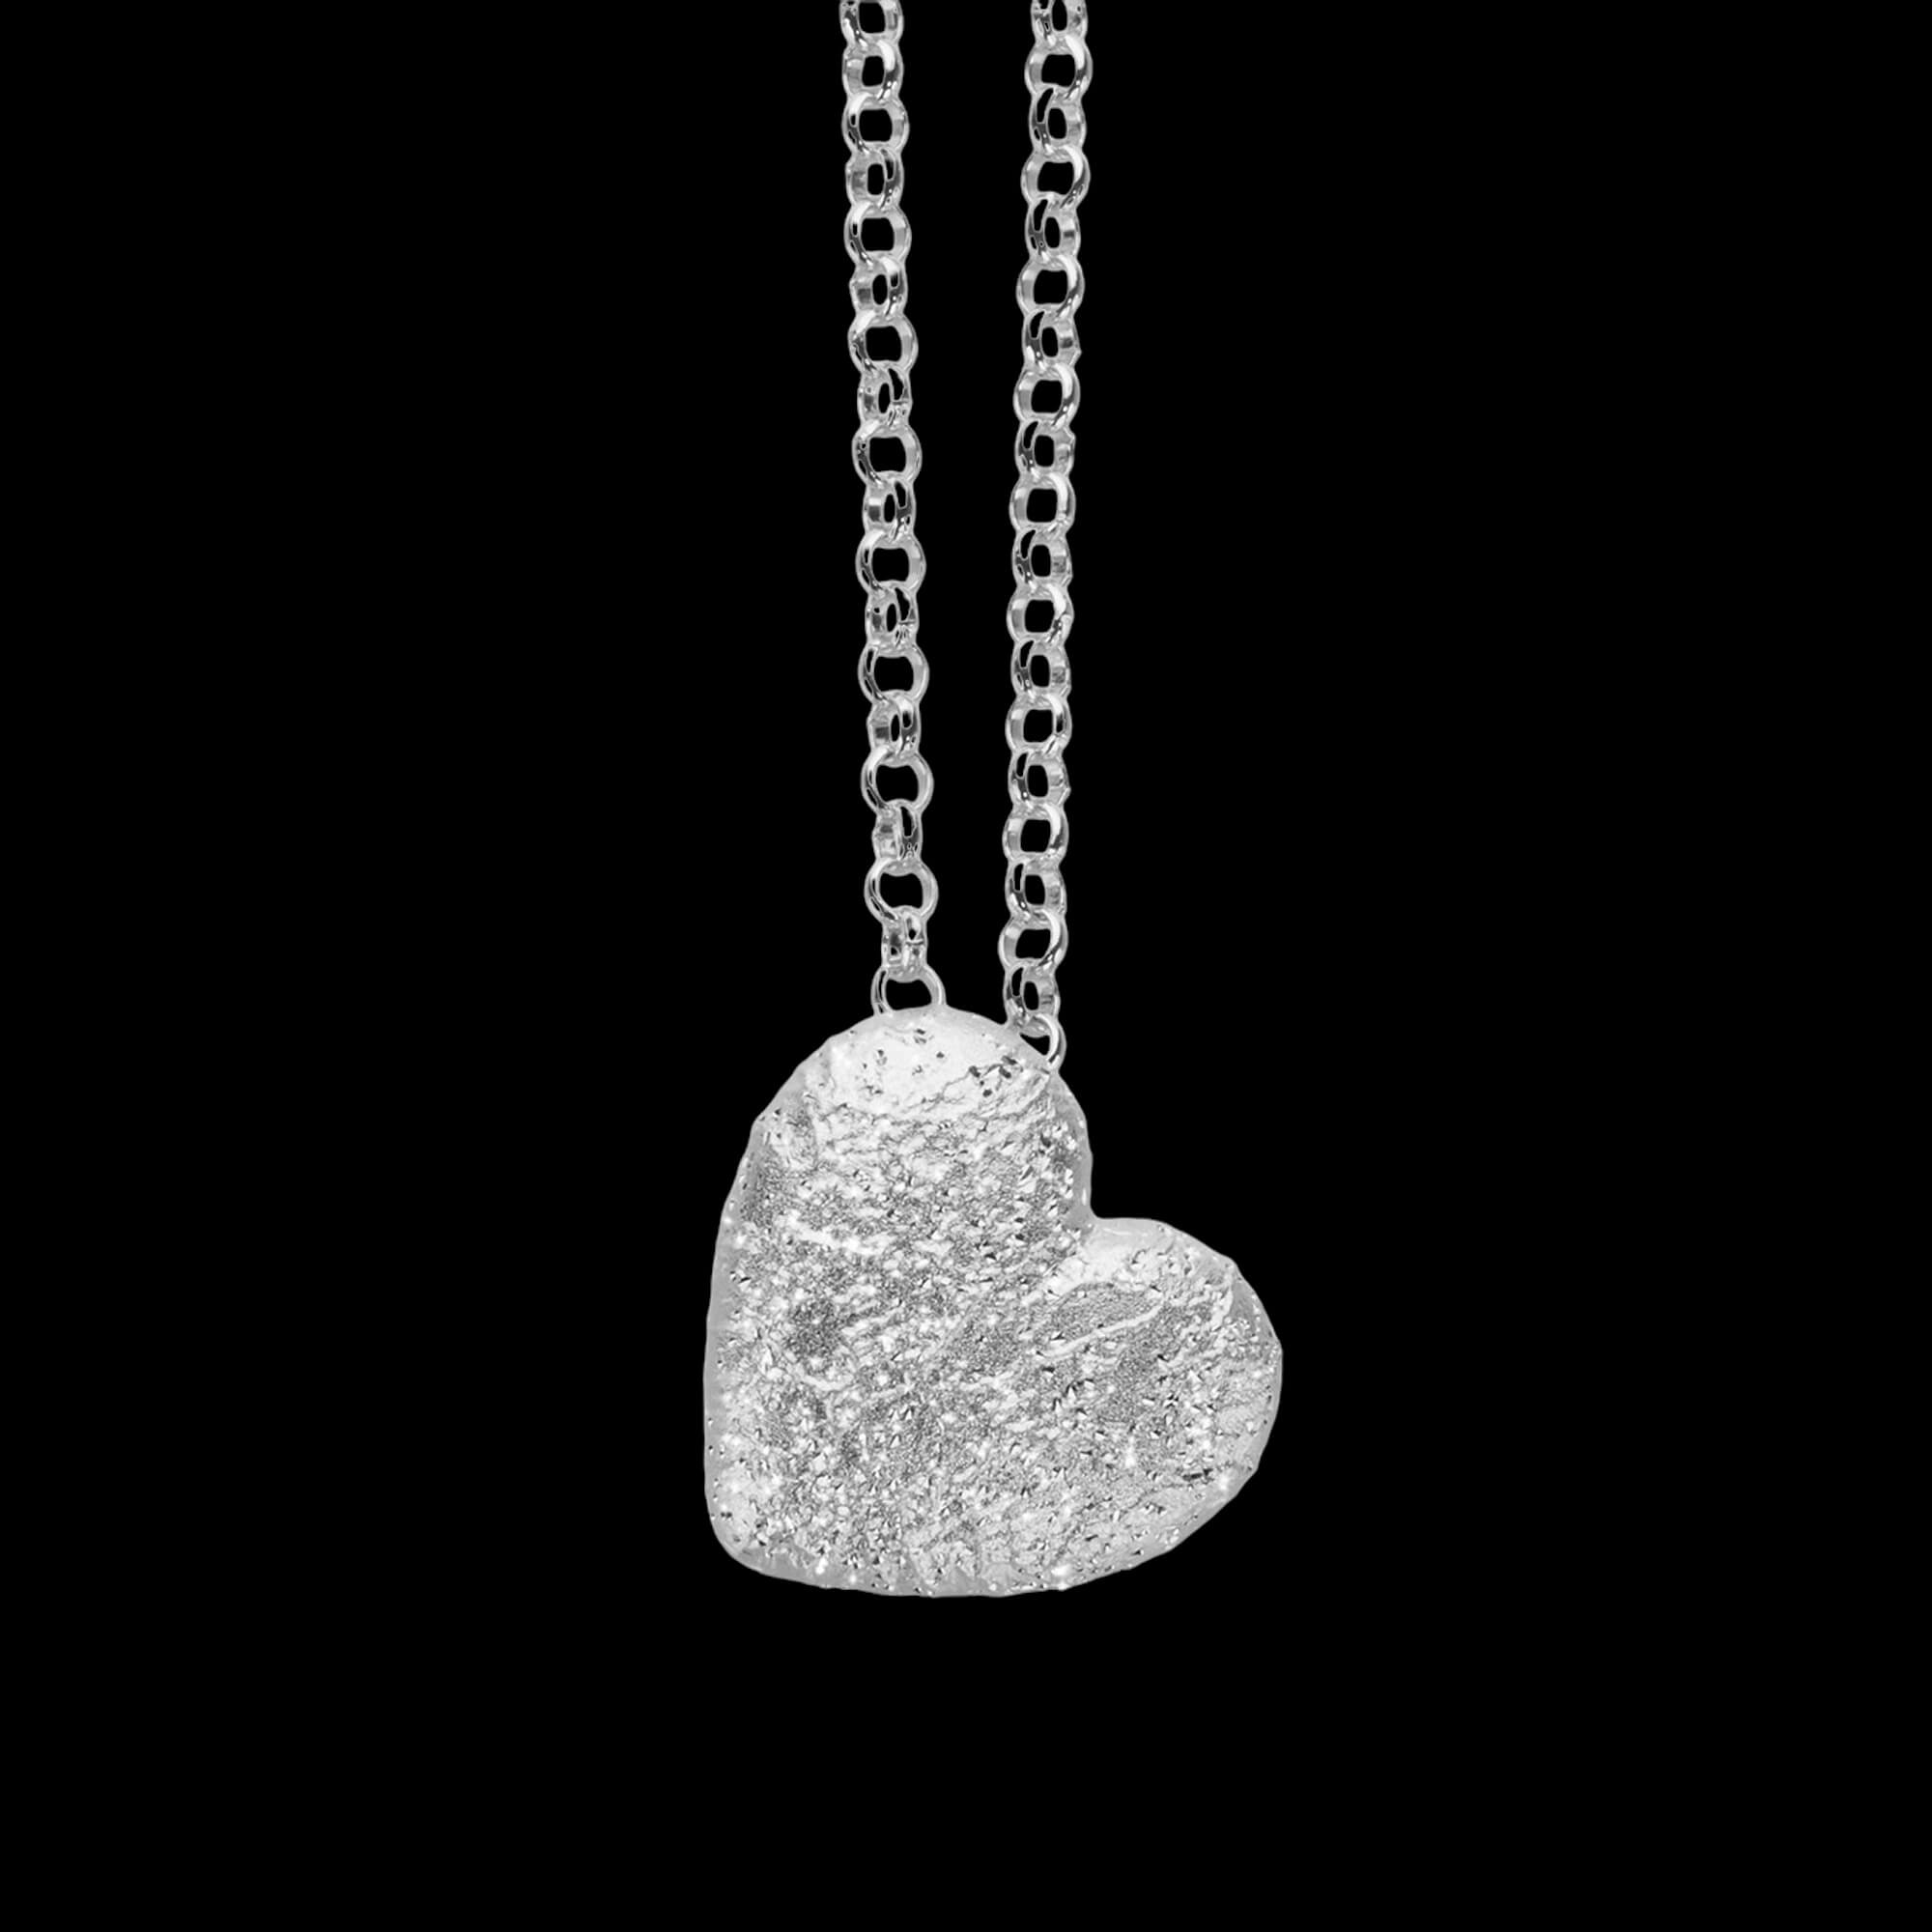 Silver heart pendant with chain